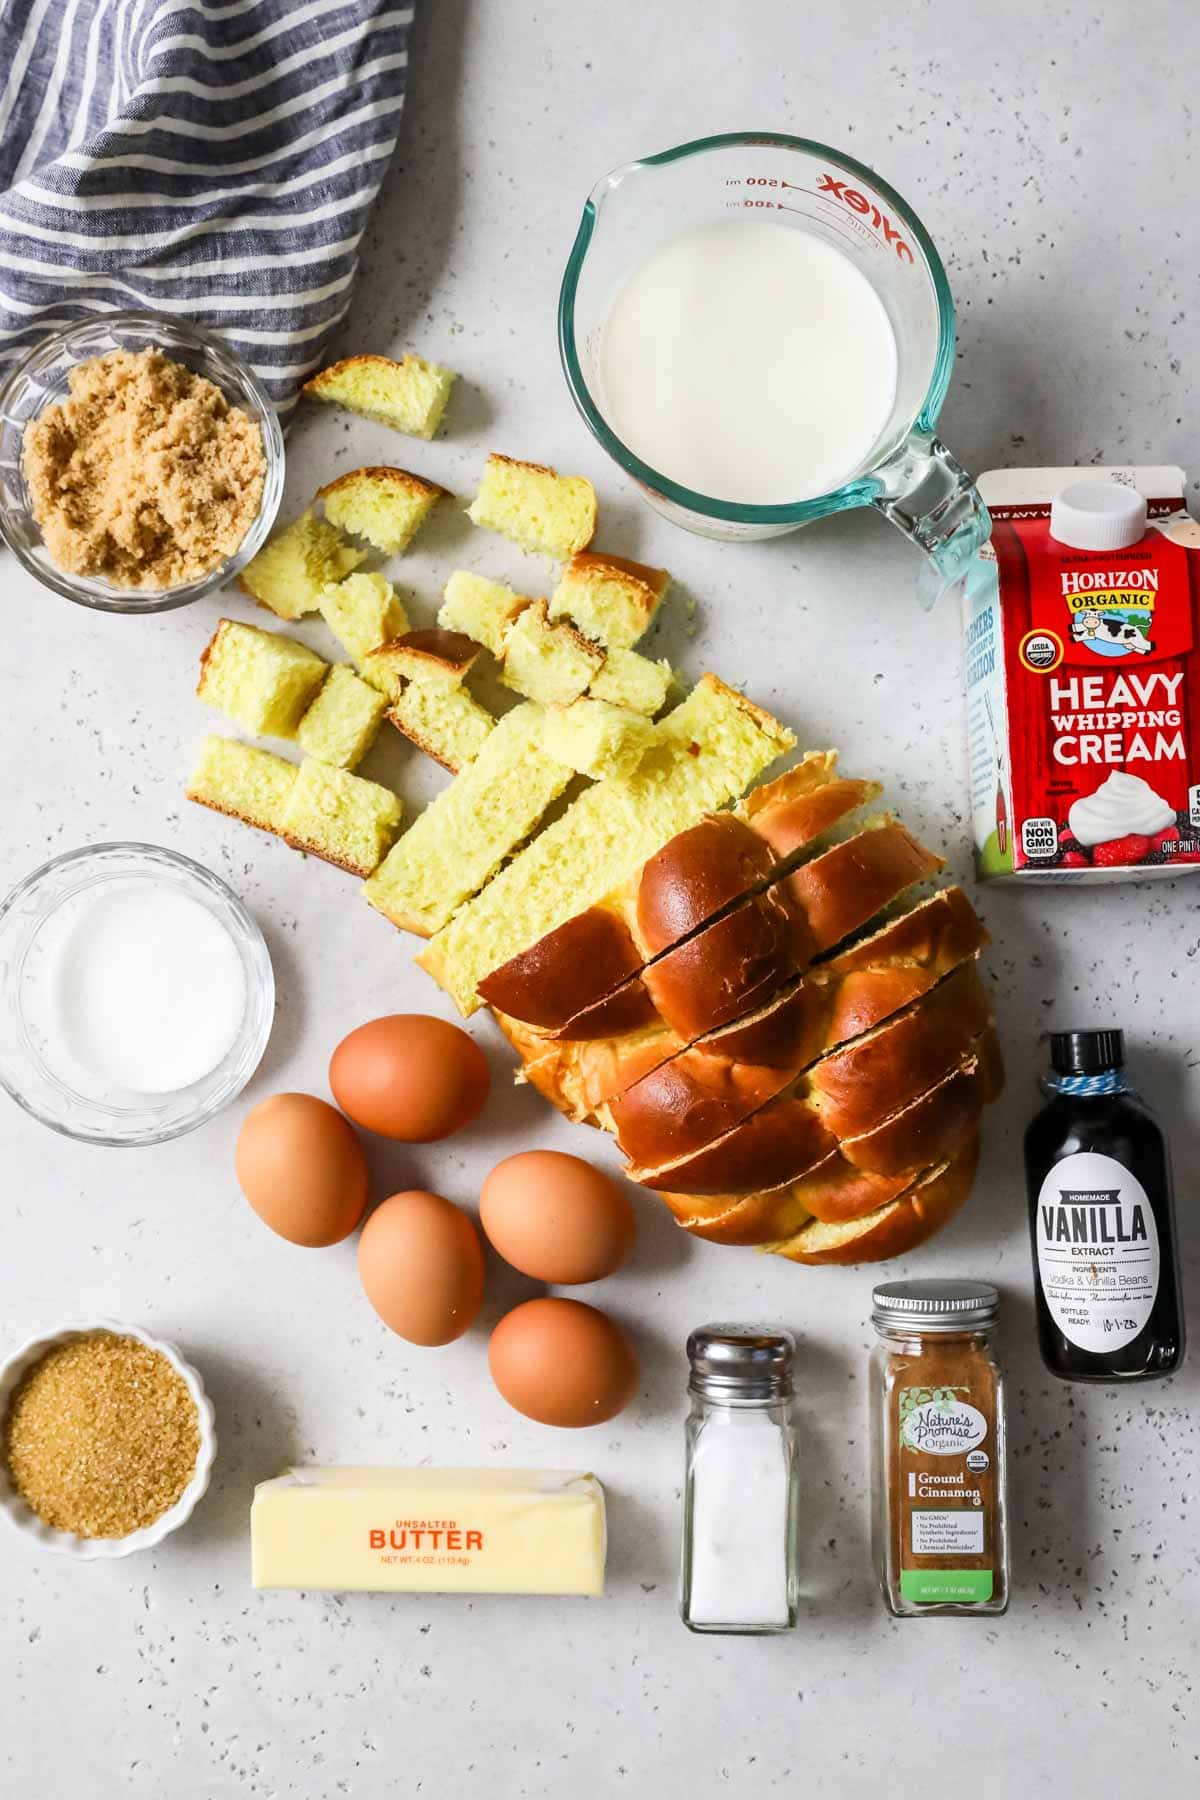 Overhead view of ingredients including challah bread, heavy cream, eggs, cinnamon, and more.